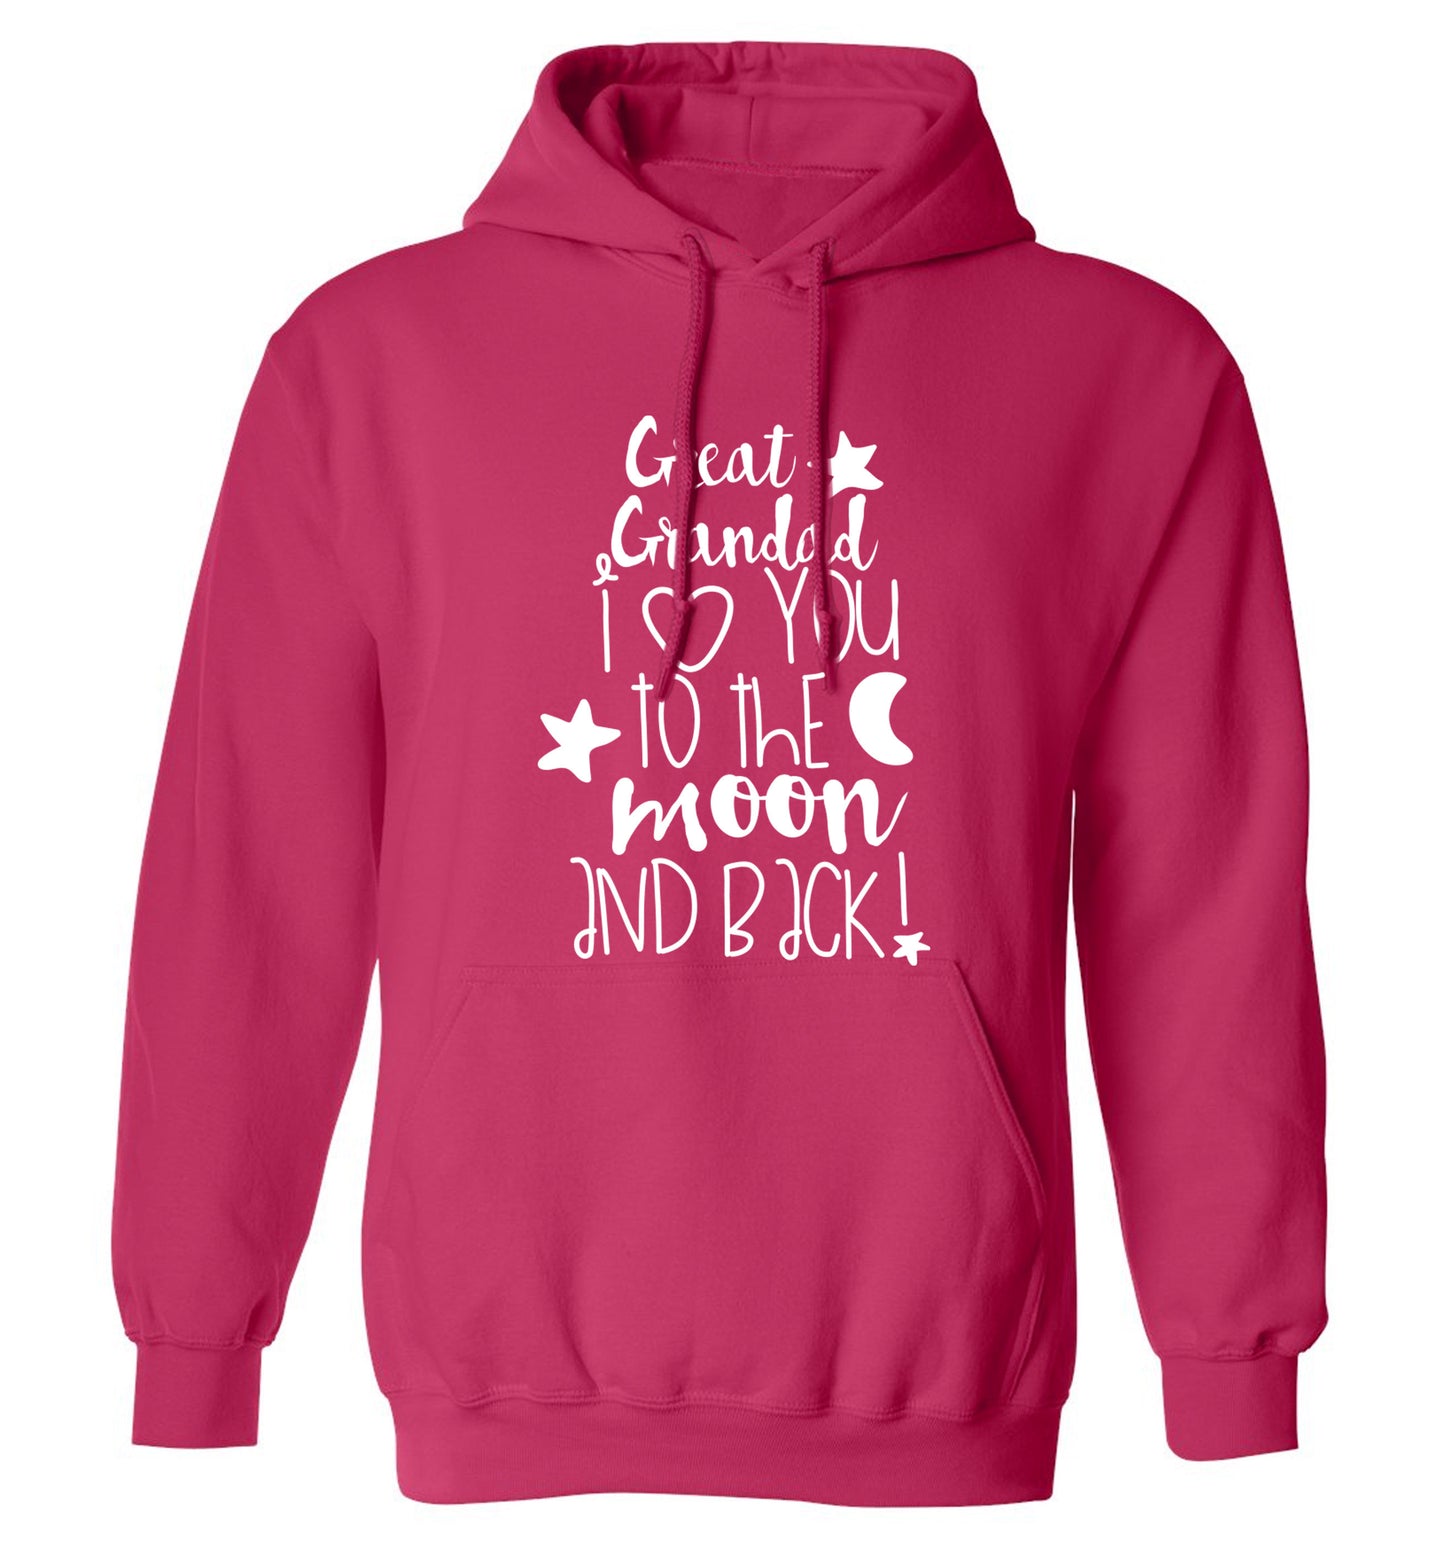 Great Grandad I love you to the moon and back adults unisex pink hoodie 2XL